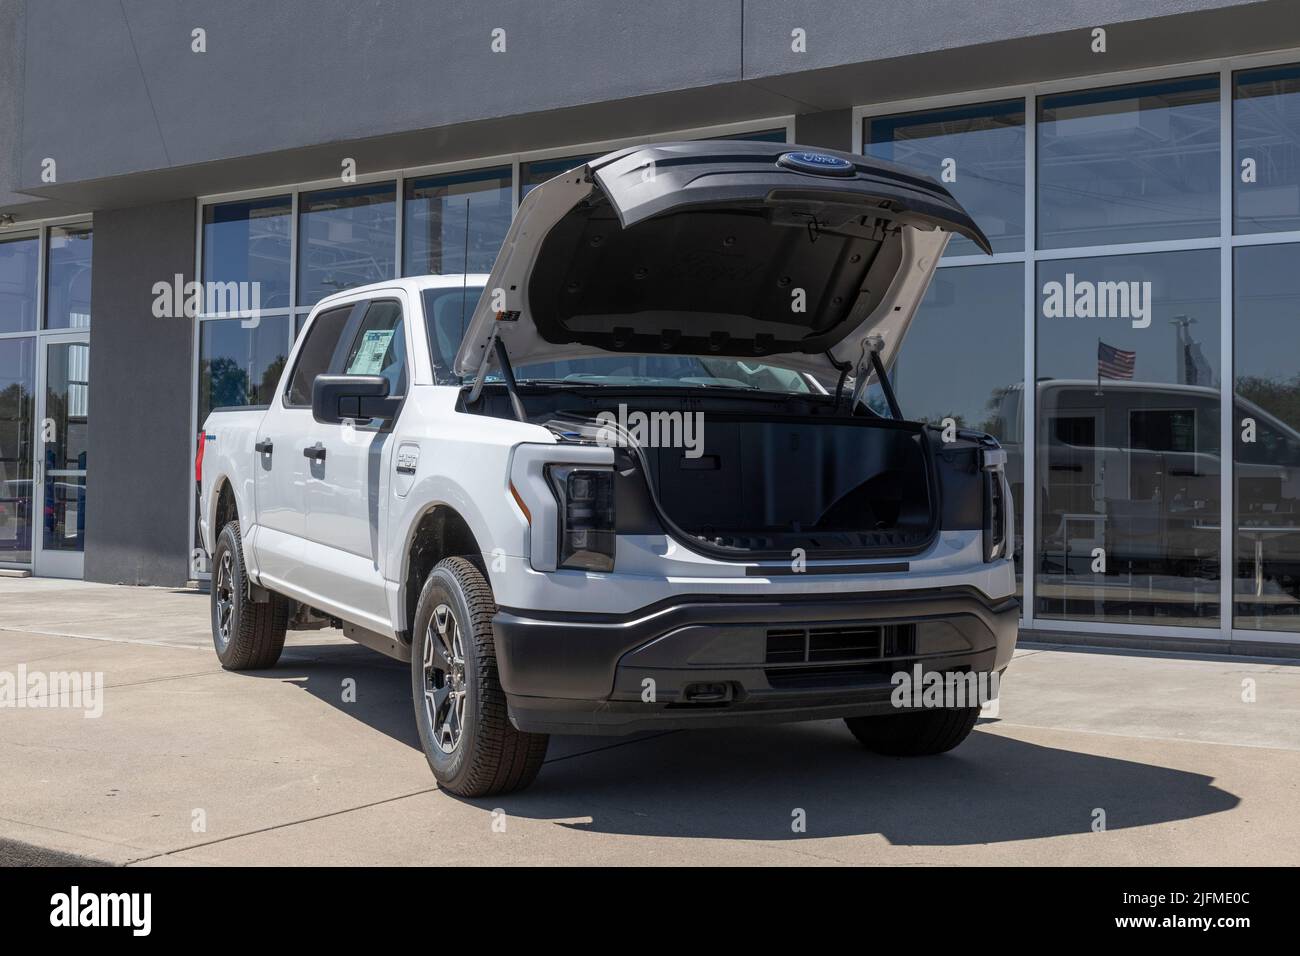 Plainfield - Circa July 2022: Ford F-150 Lightning Frunk display. Ford offers the F150 Lightning all-electric truck in Pro, XLT, Lariat, and Platinum Stock Photo